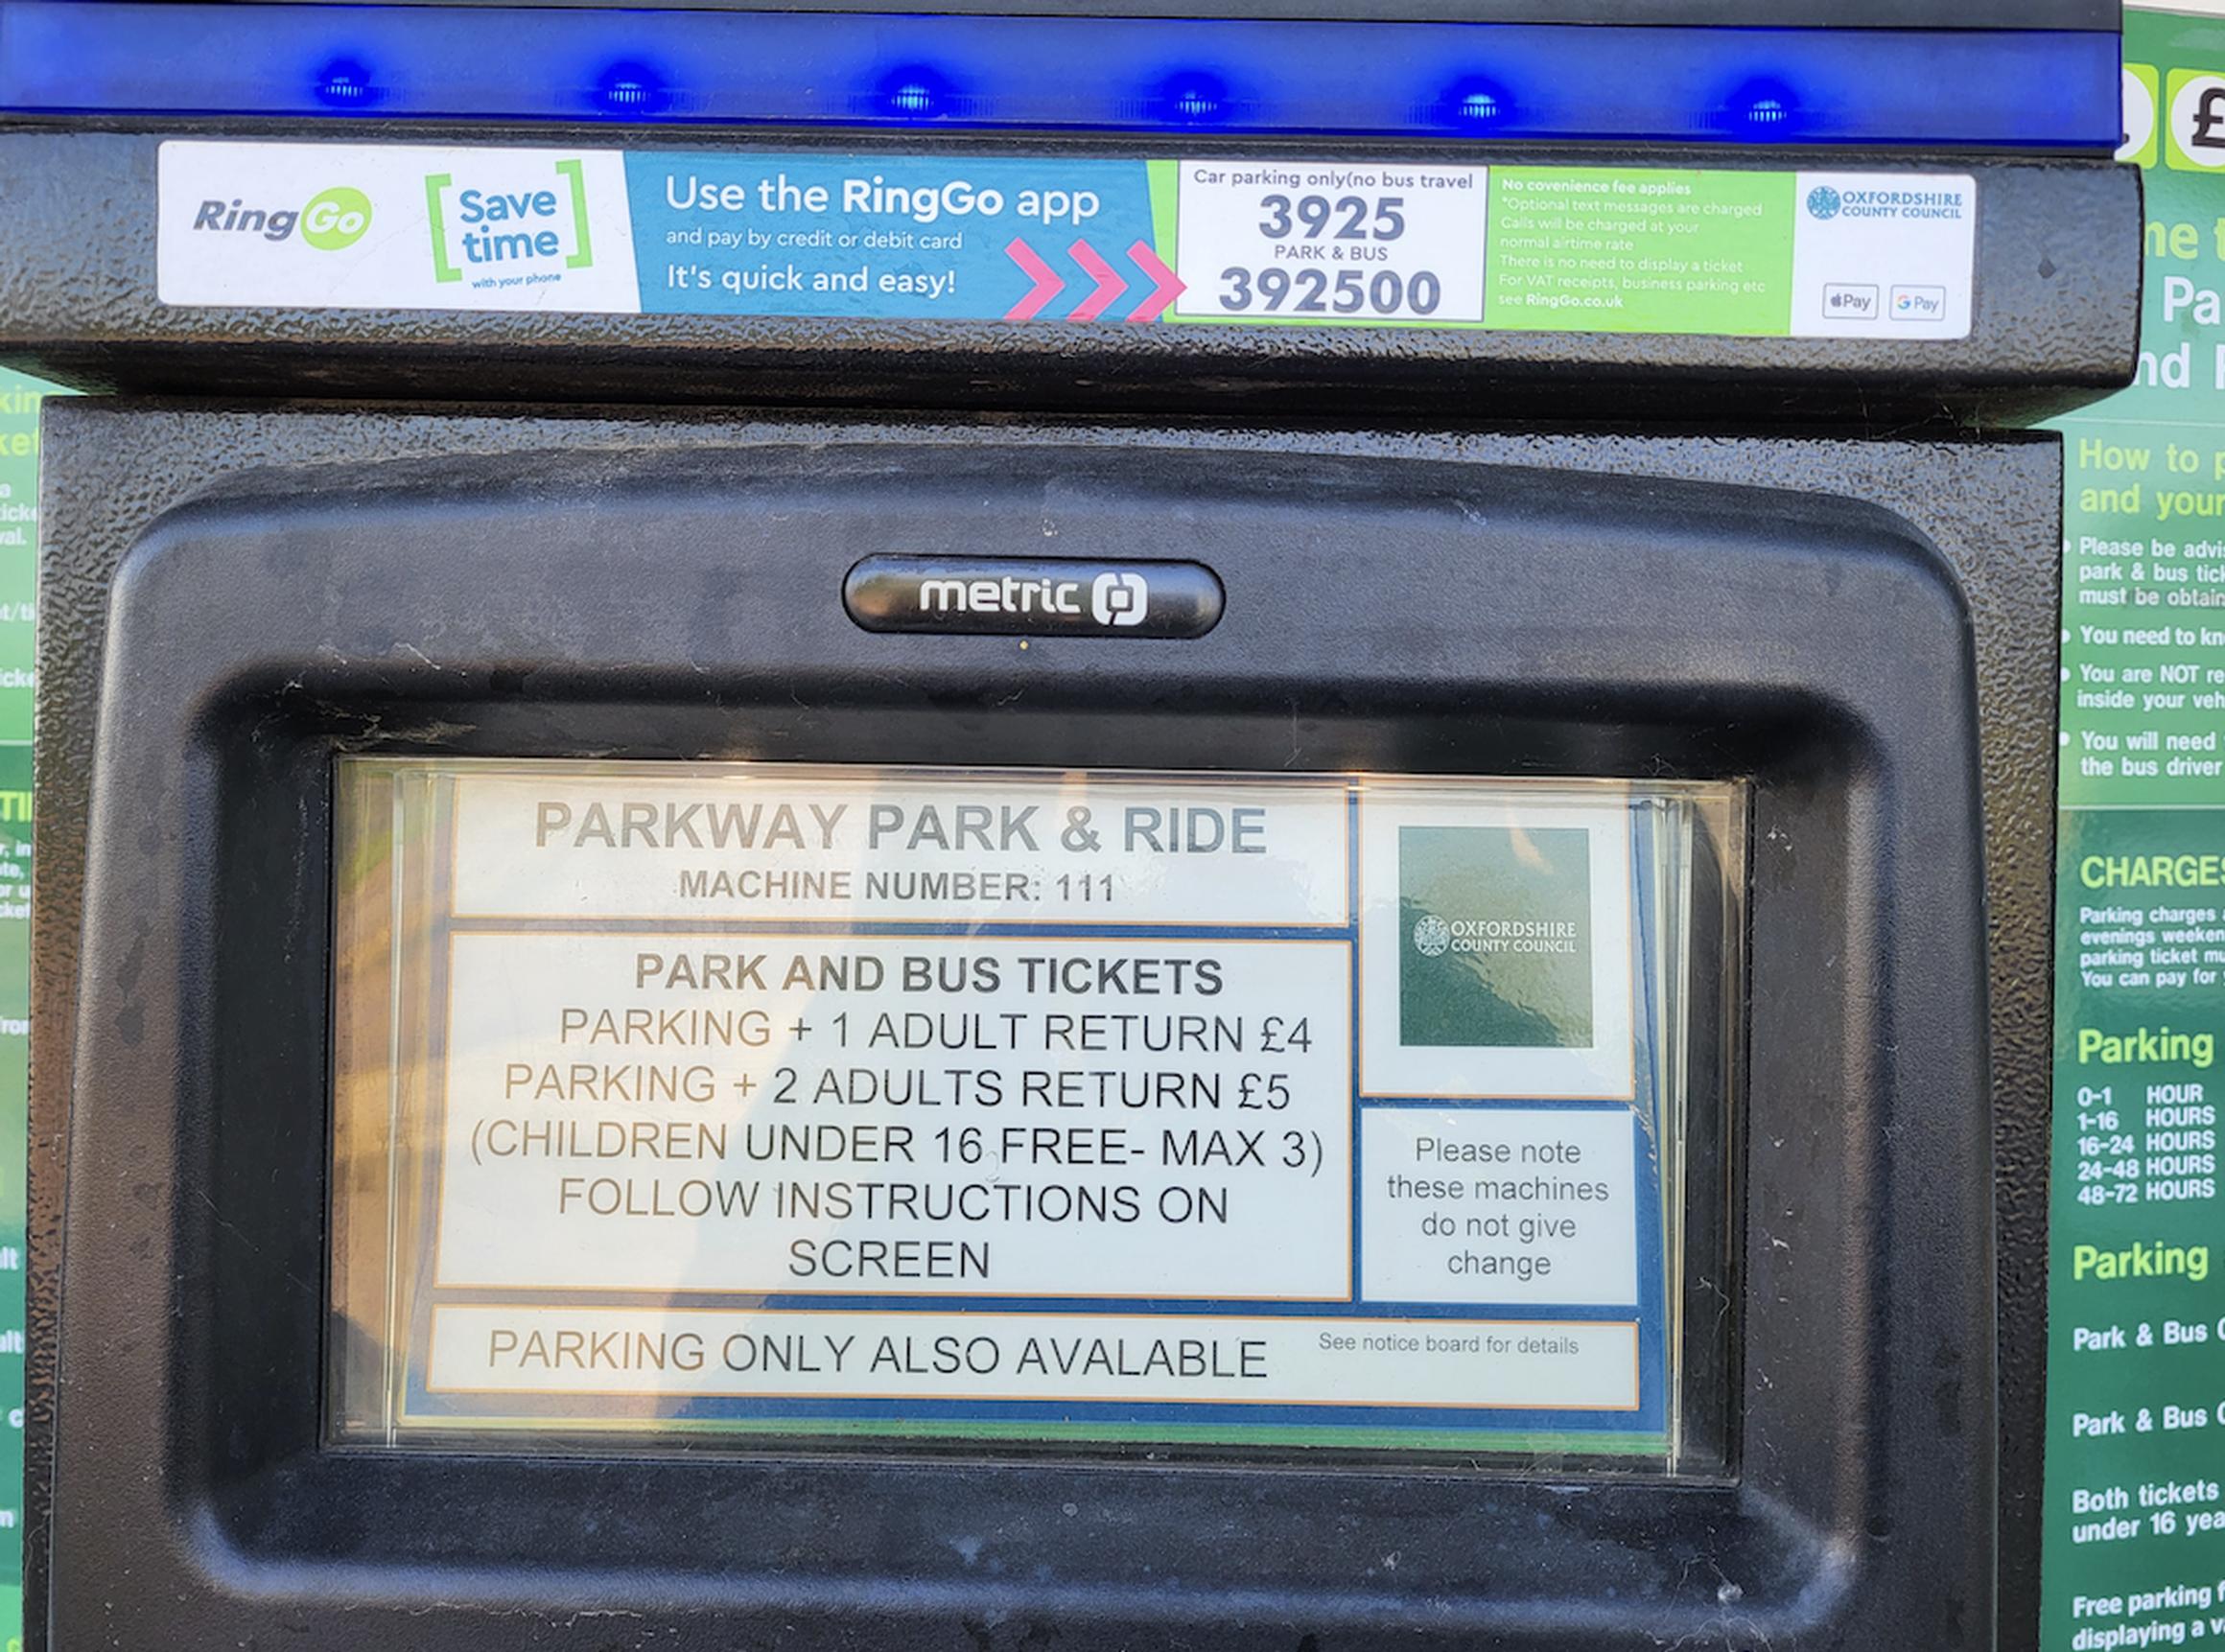 Drivers can buy a combined ticket through the RingGo parking app, or at one of the on-site ticket machines